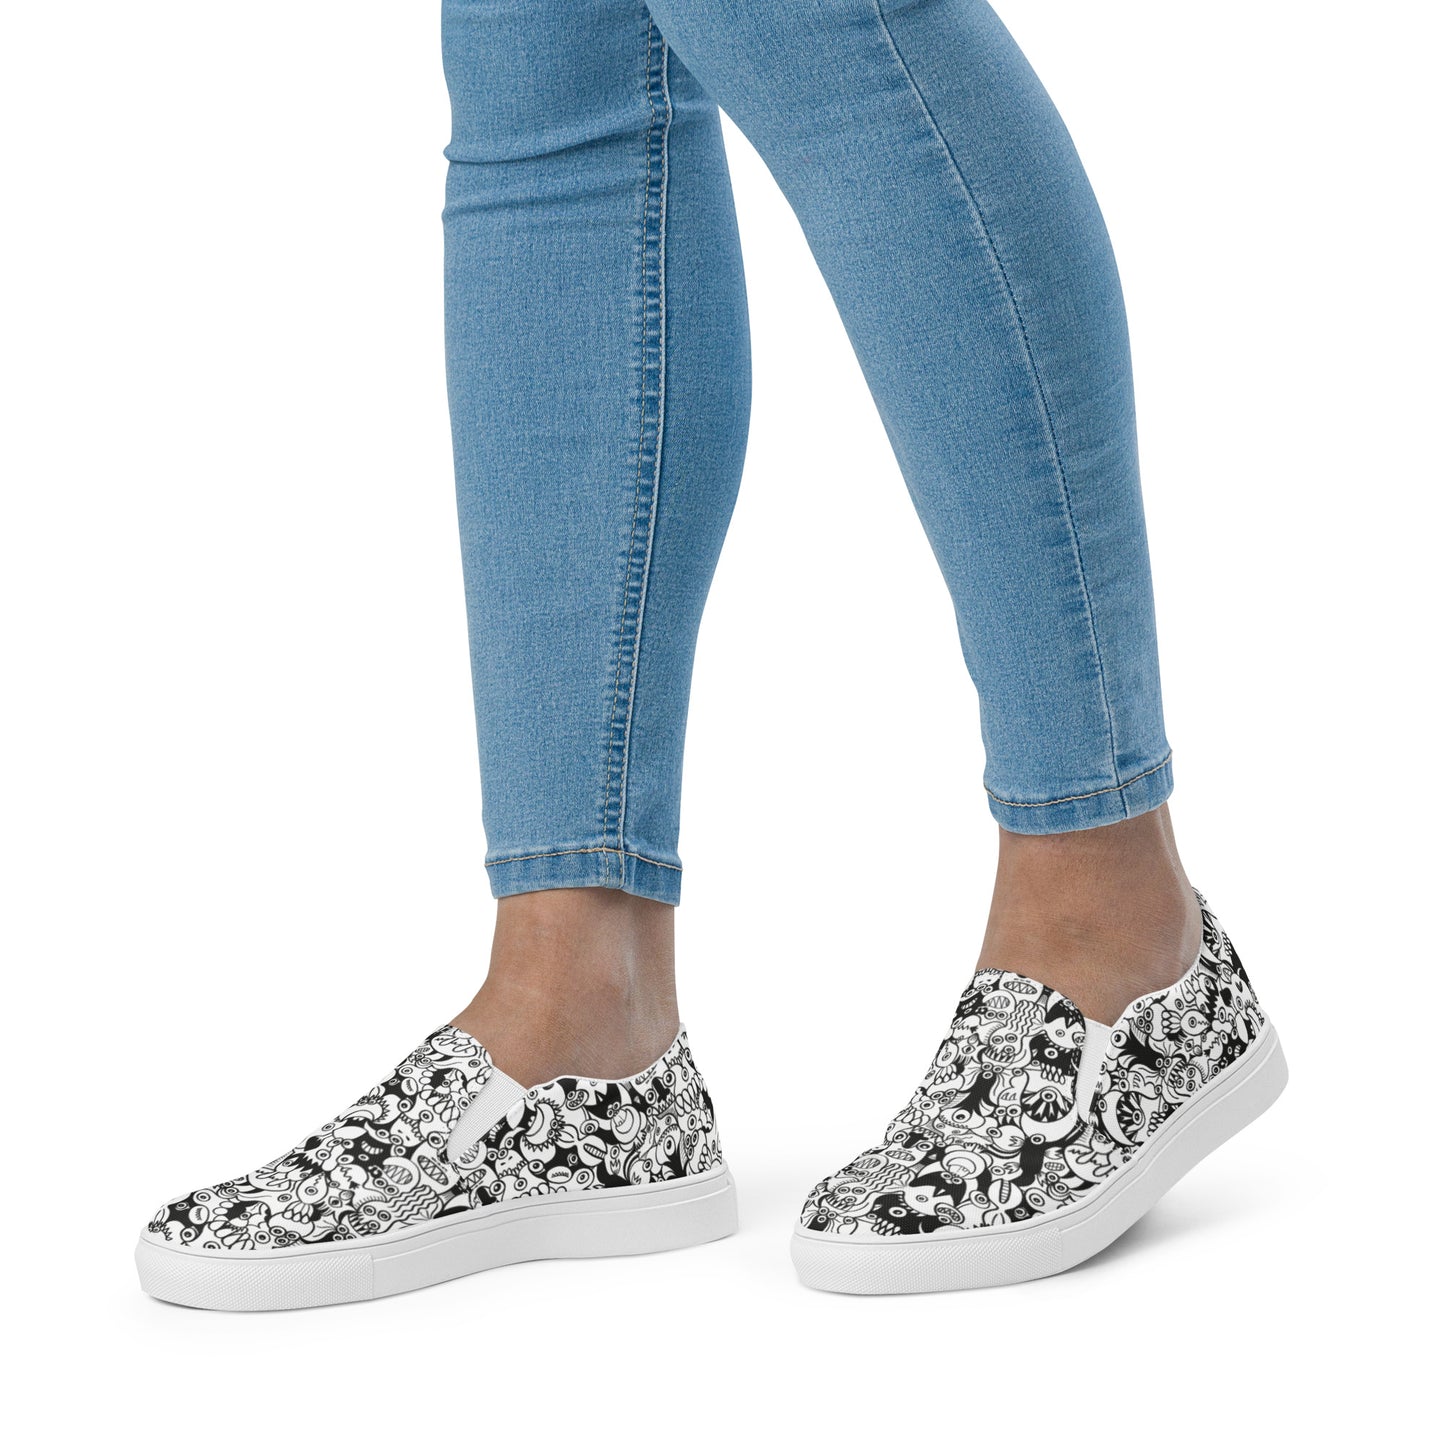 Black and white cool doodles art Women’s slip-on canvas shoes. Lifestyle